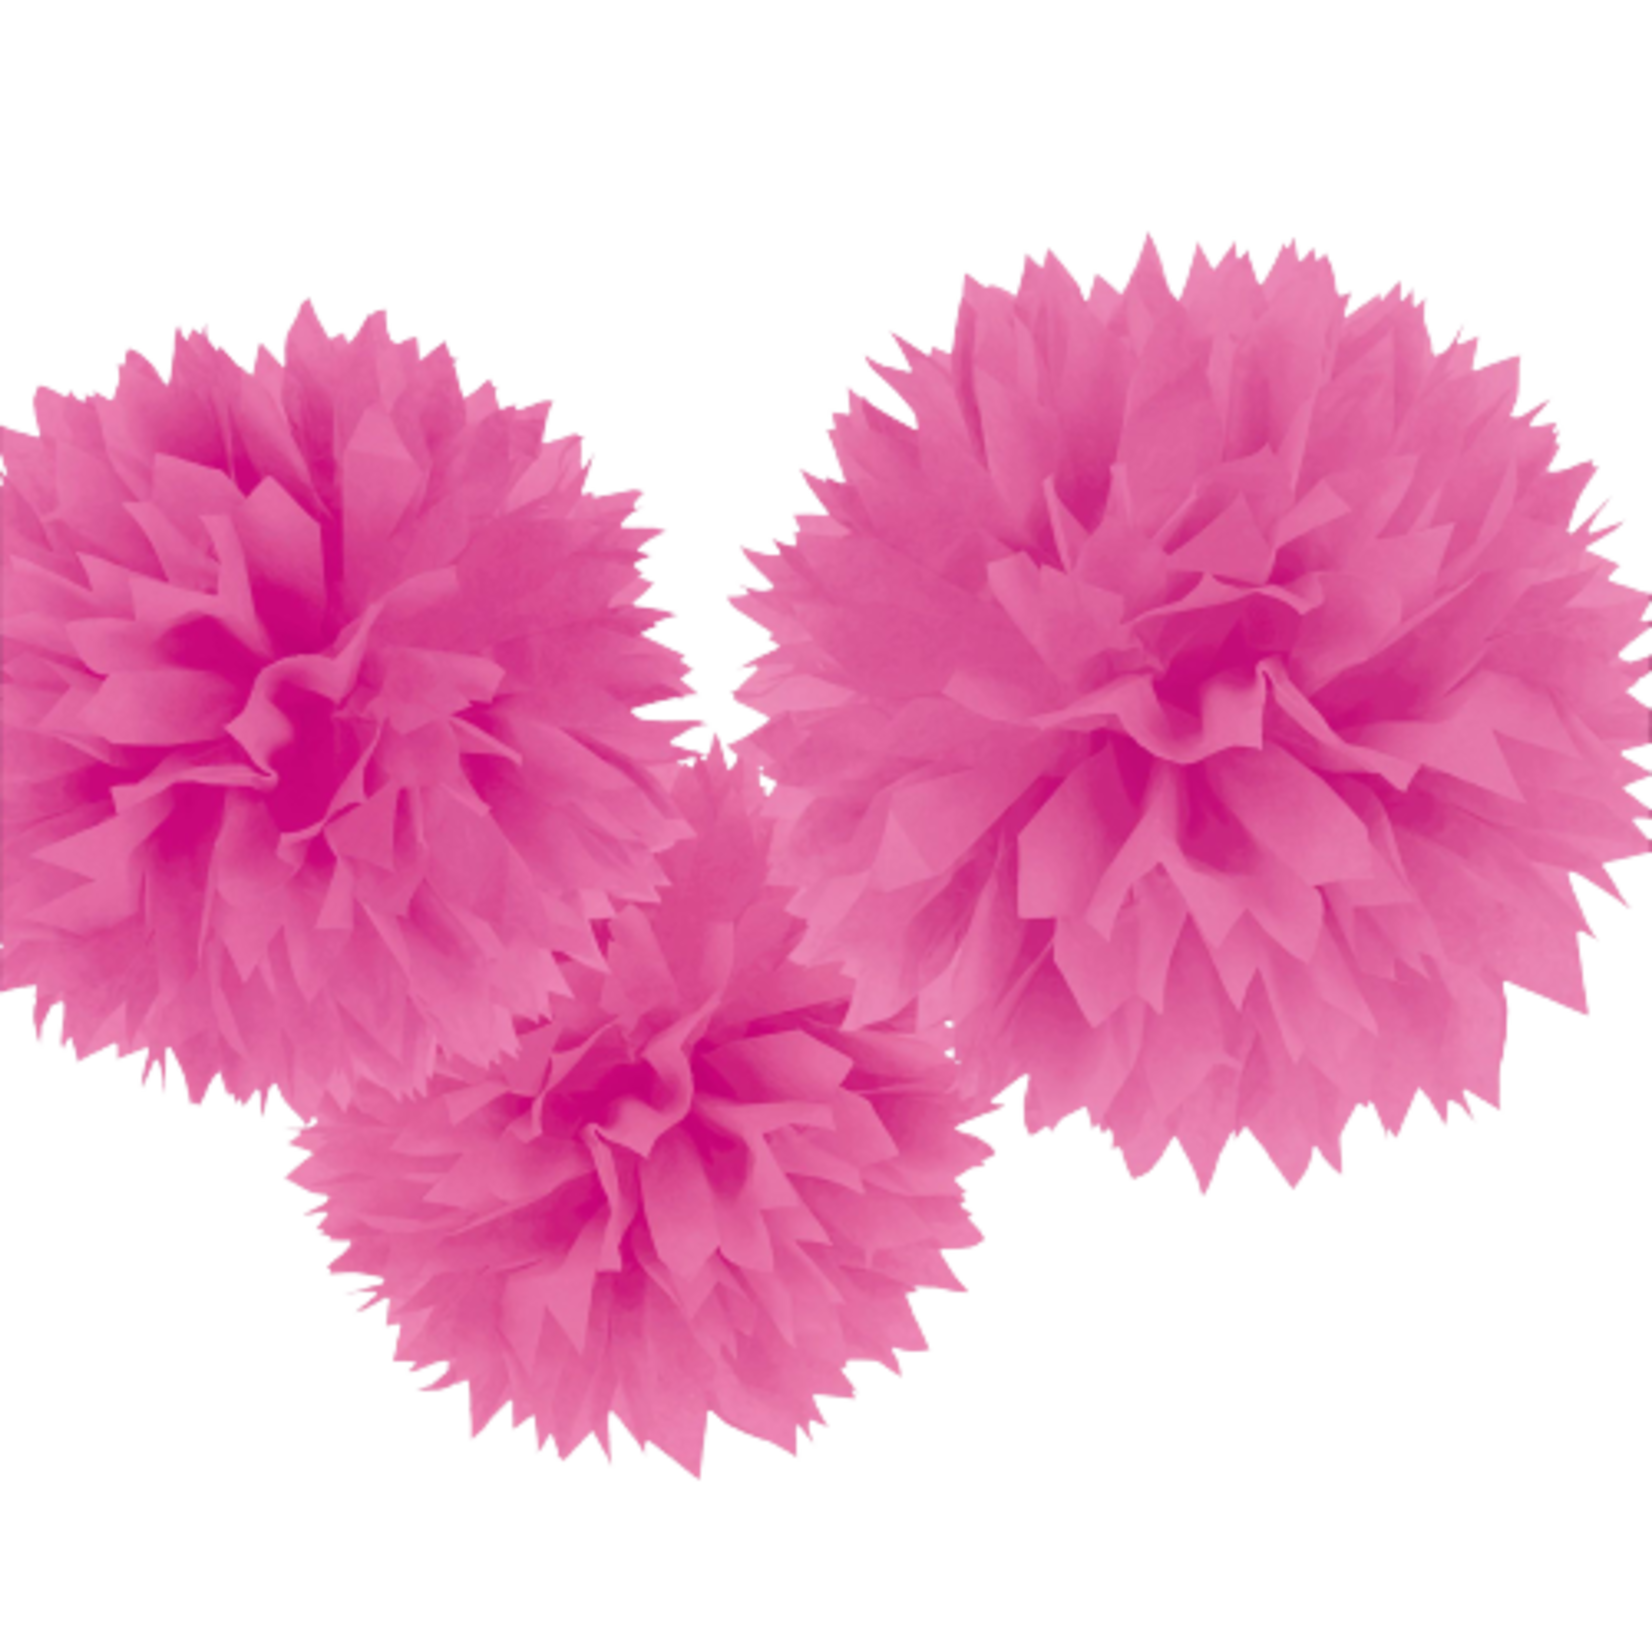 BRIGHT PINK FLUFFY PAPER DECORATIONS